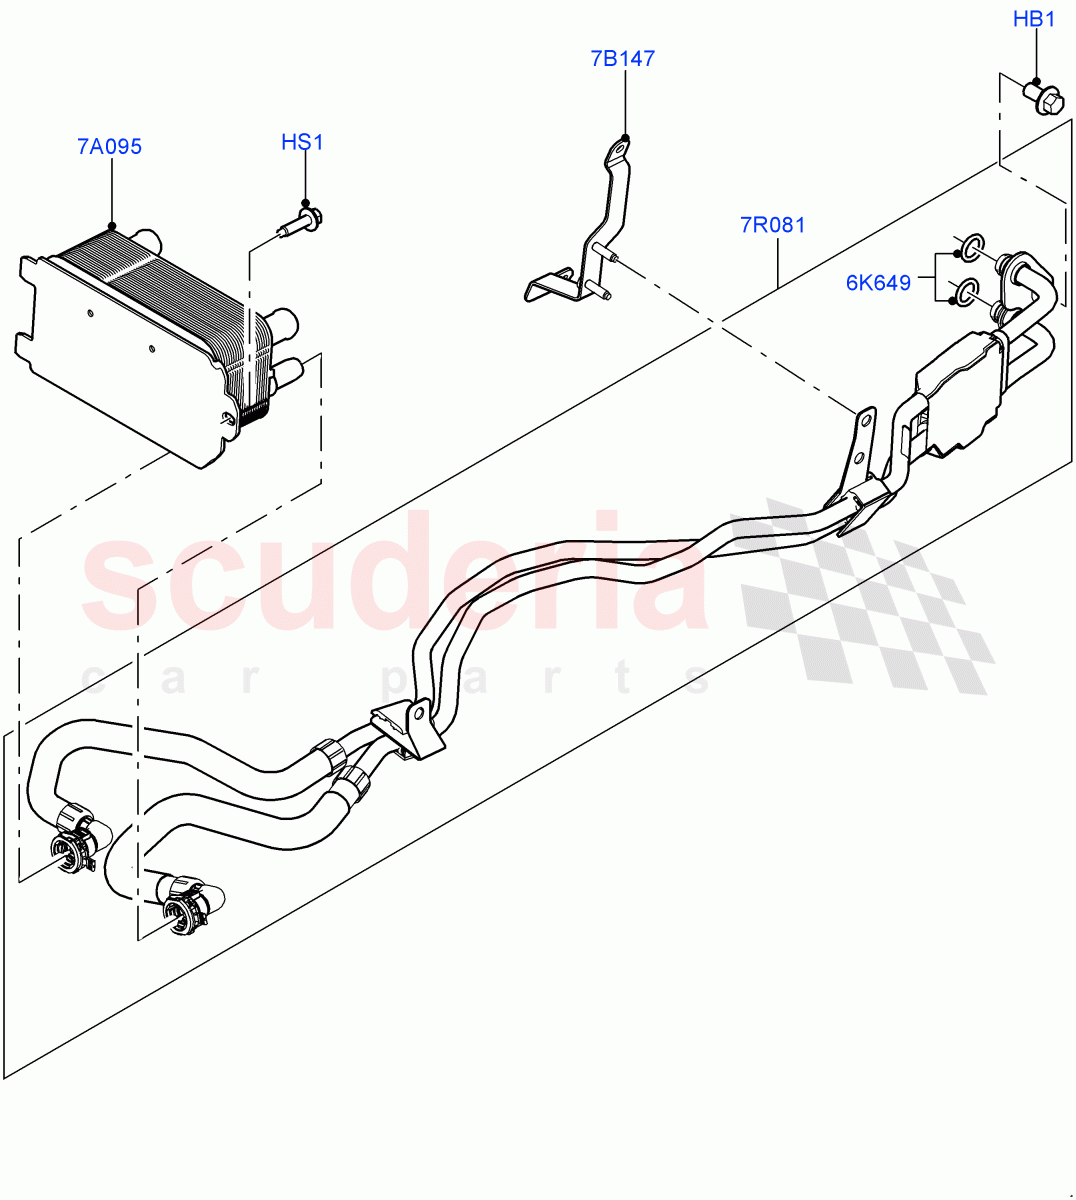 Transmission Cooling Systems(Solihull Plant Build)(2.0L I4 DSL HIGH DOHC AJ200,8 Speed Auto Trans ZF 8HP70 4WD)((V)FROMHA000001) of Land Rover Land Rover Range Rover Sport (2014+) [2.0 Turbo Petrol GTDI]